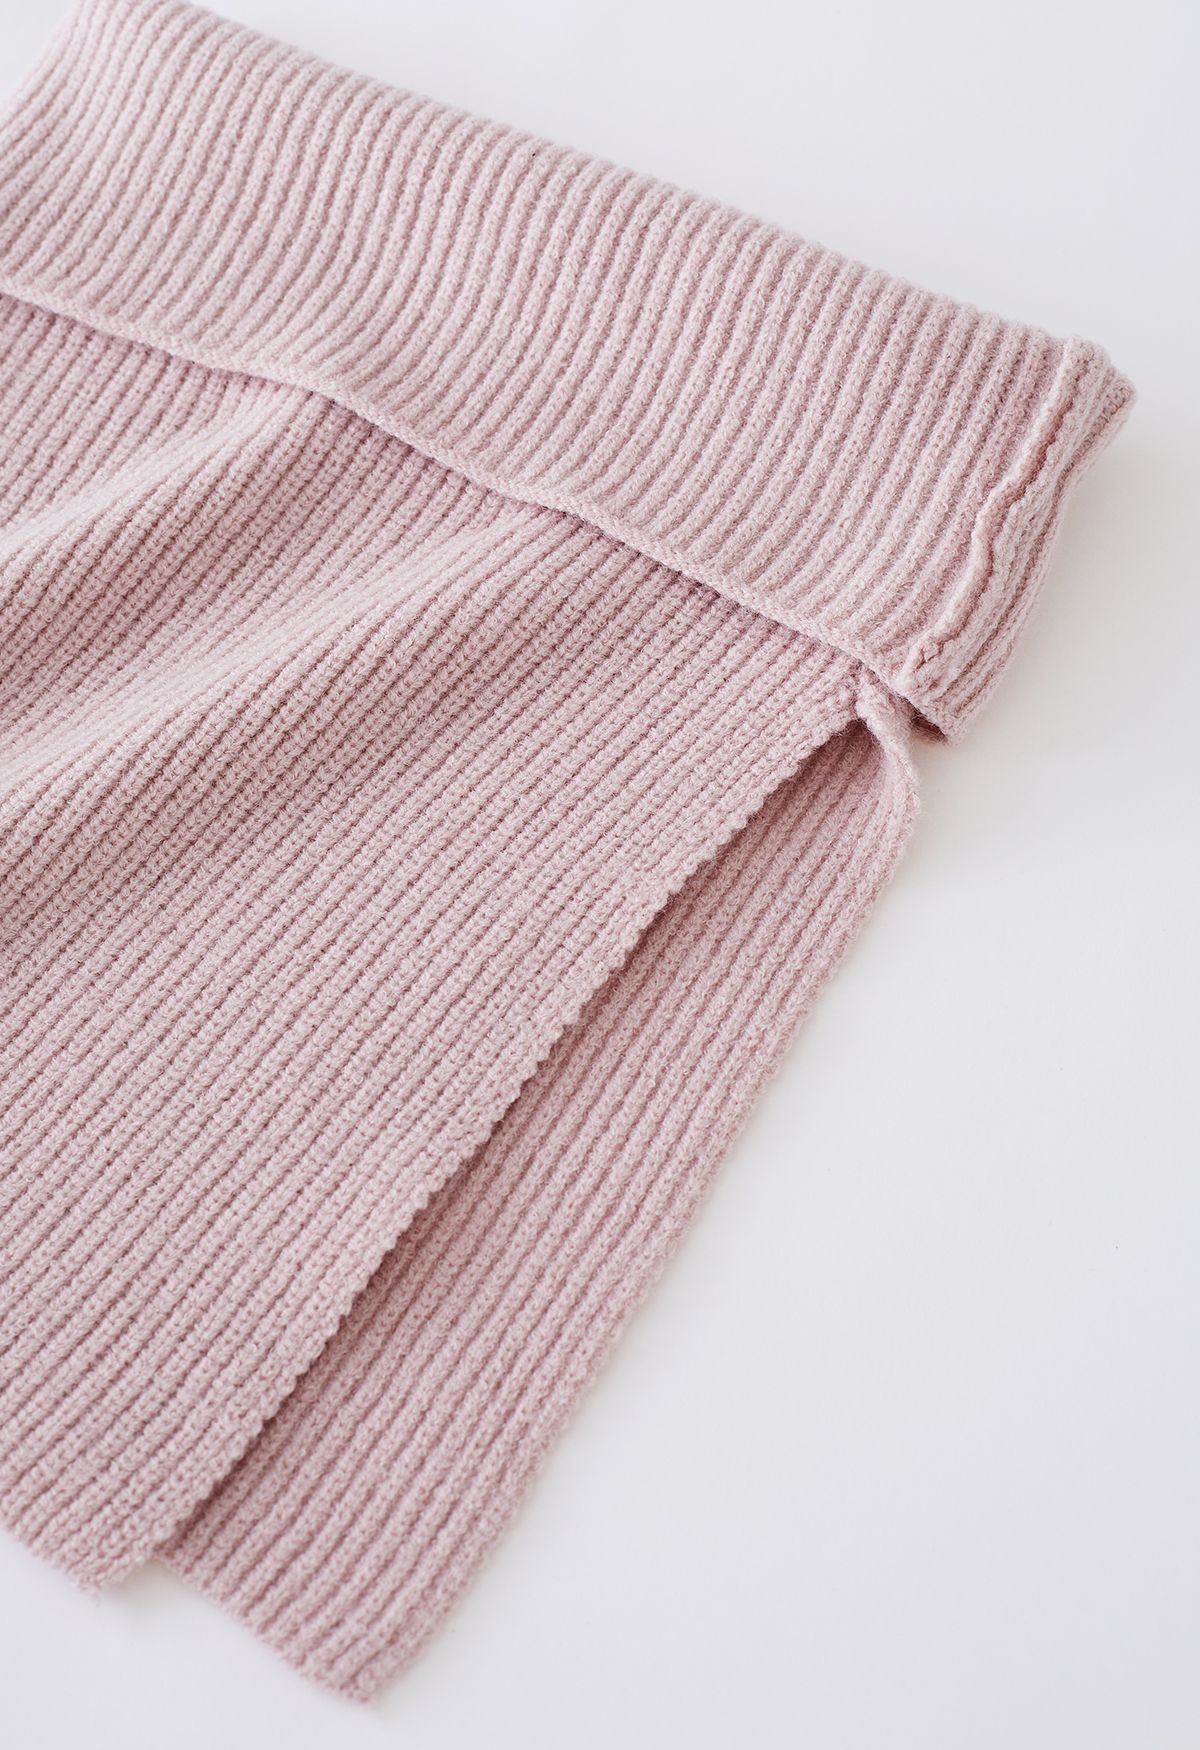 Louis Vuitton Dusty Pink Mohair Rib Knit Tapered Waist Sweater XS